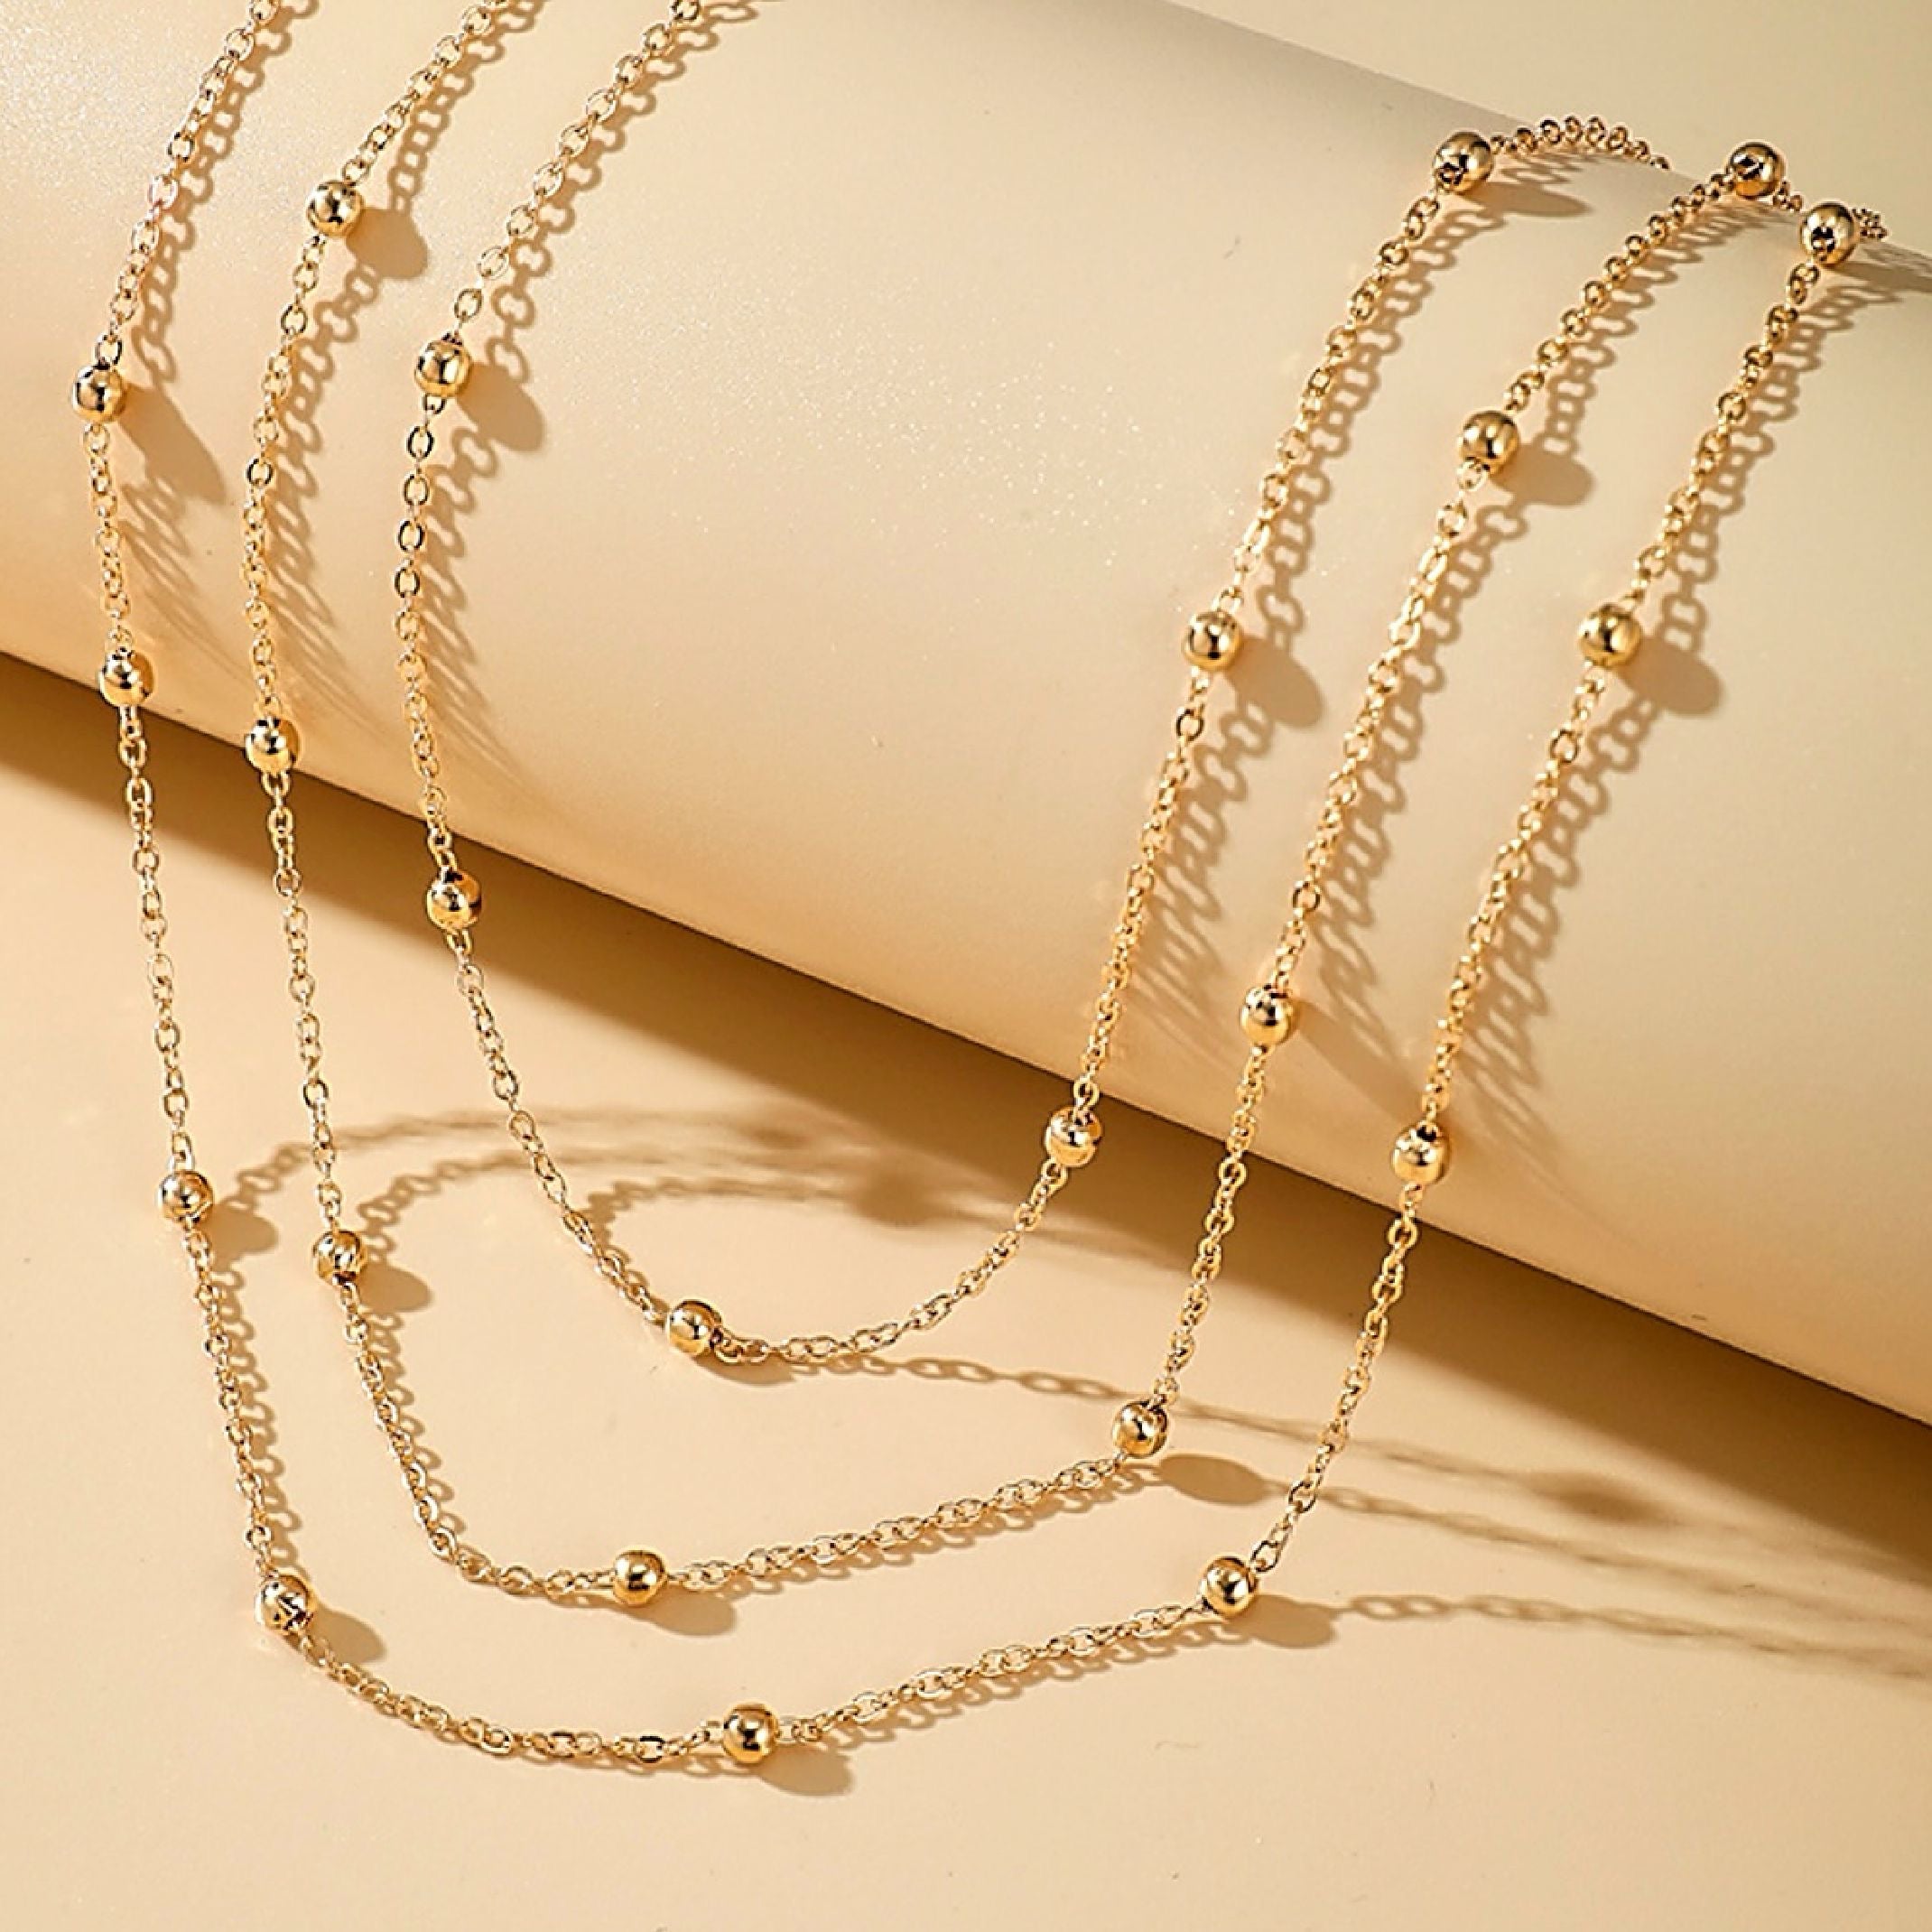 Gold bead chains layered 